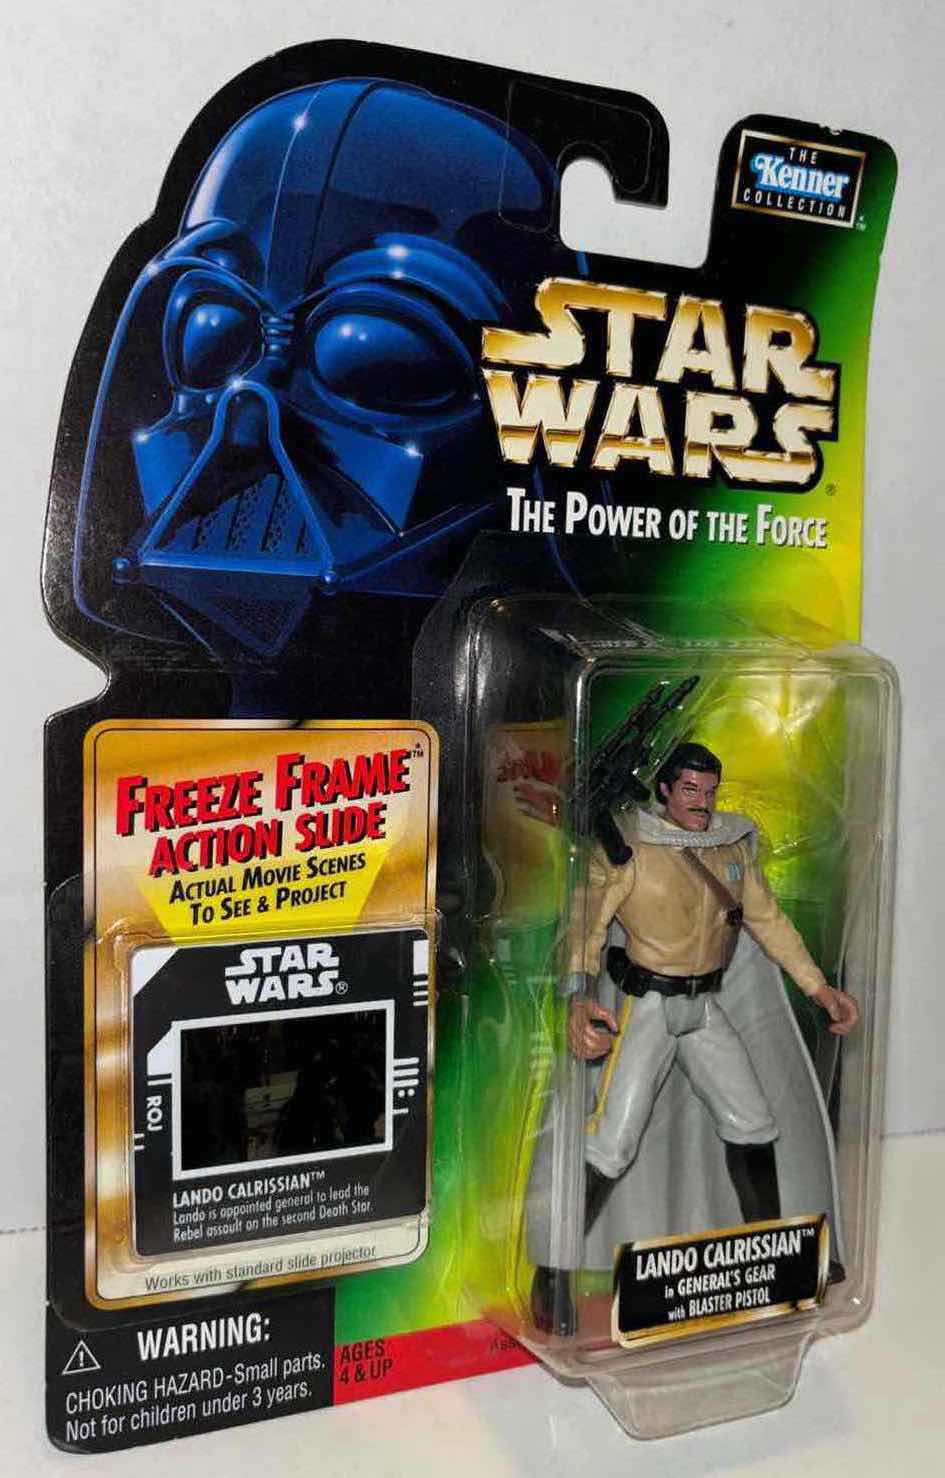 Photo 1 of NEW KENNER STAR WARS THE POWER OF THE FORCE ACTION FIGURE, LANDO CALRISSIAN IN GENERALS GEAR W BLASTER PISTOL & FREEZE FRAME ACTION SLIDE (1)